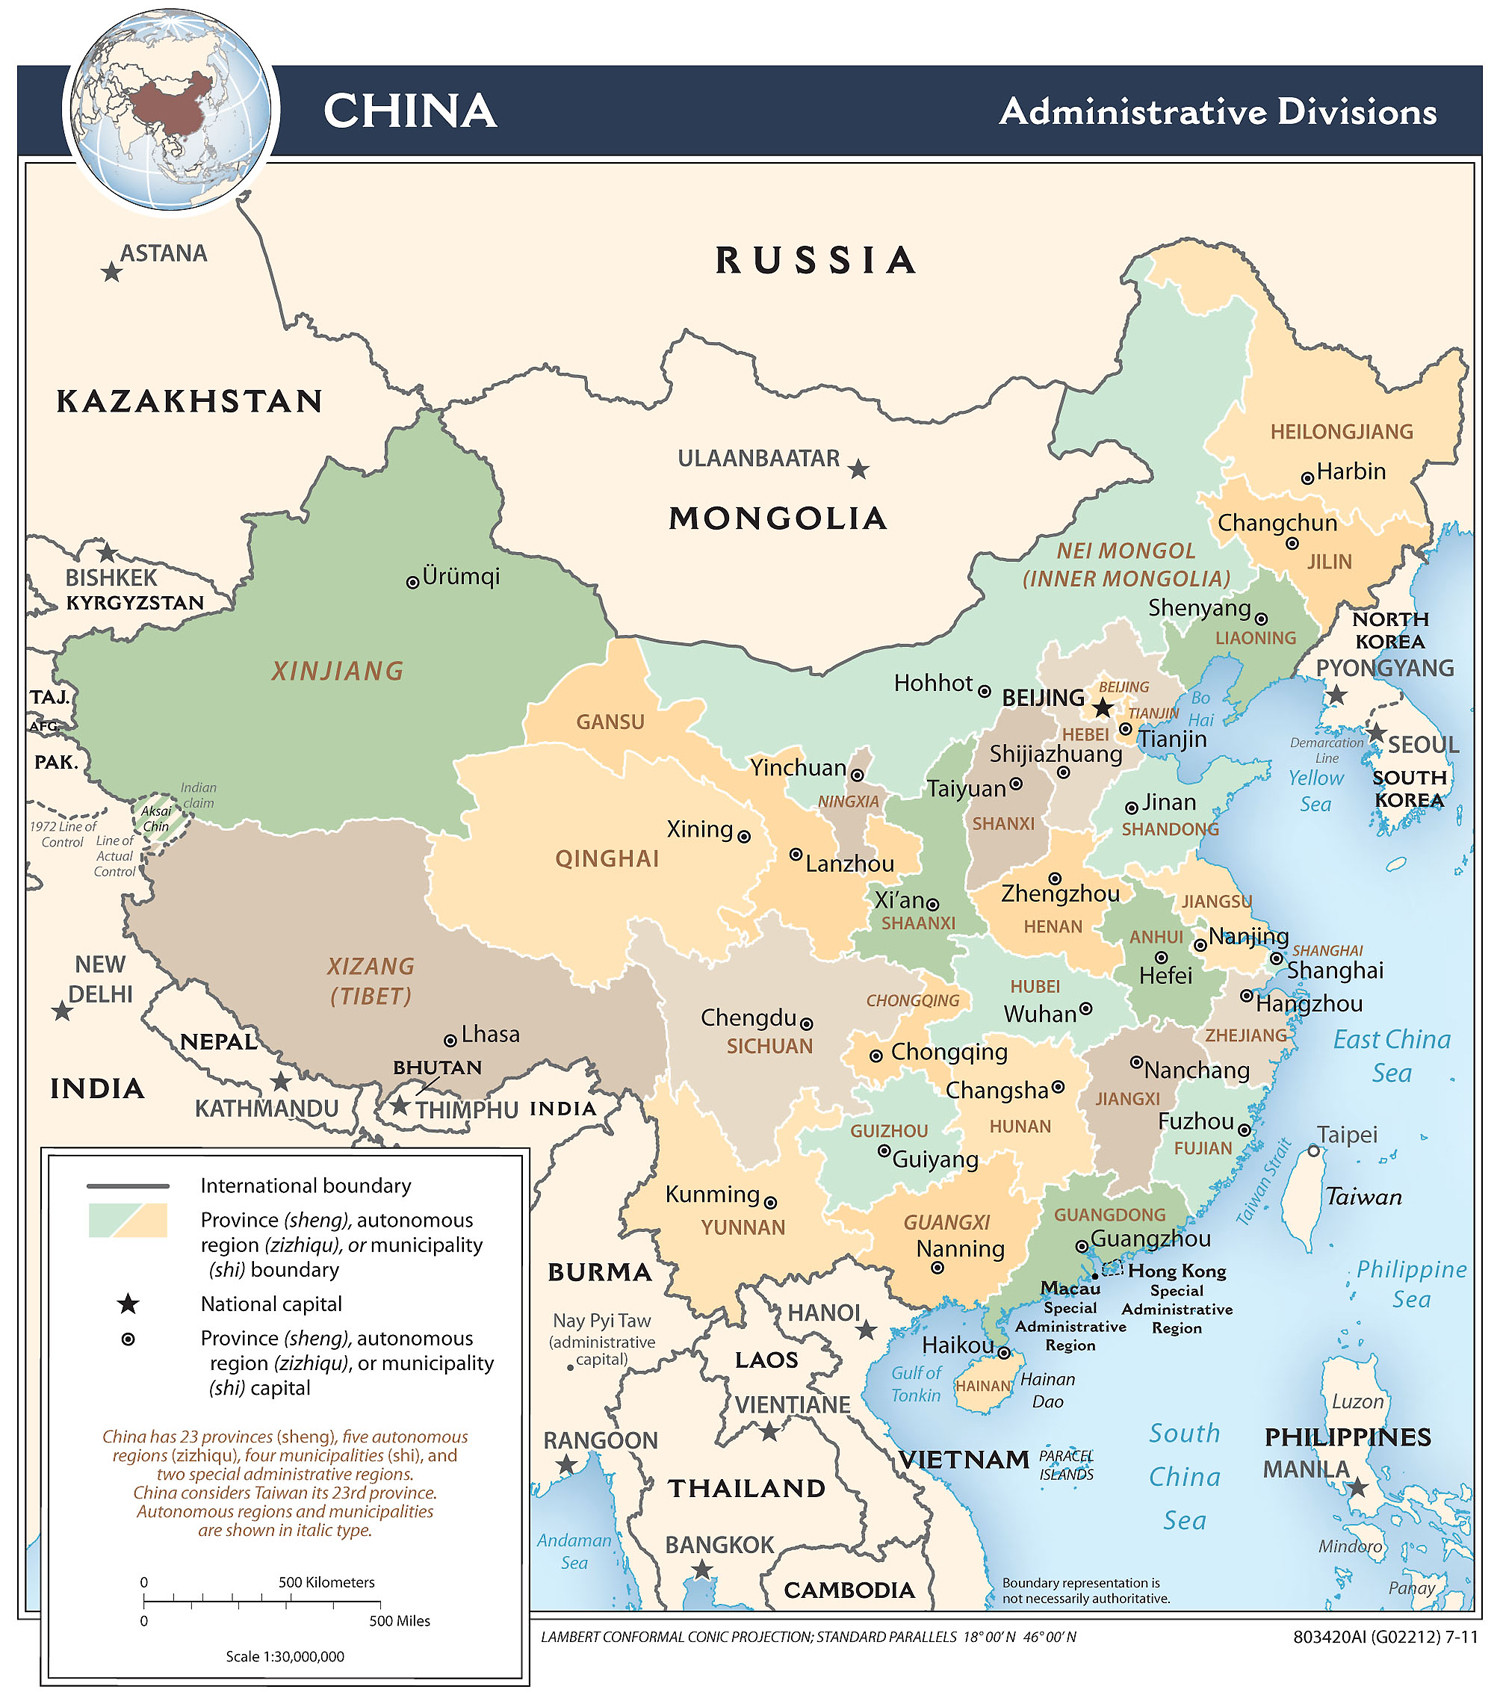 Map of China and Environs, adapted from archived cia.gov image